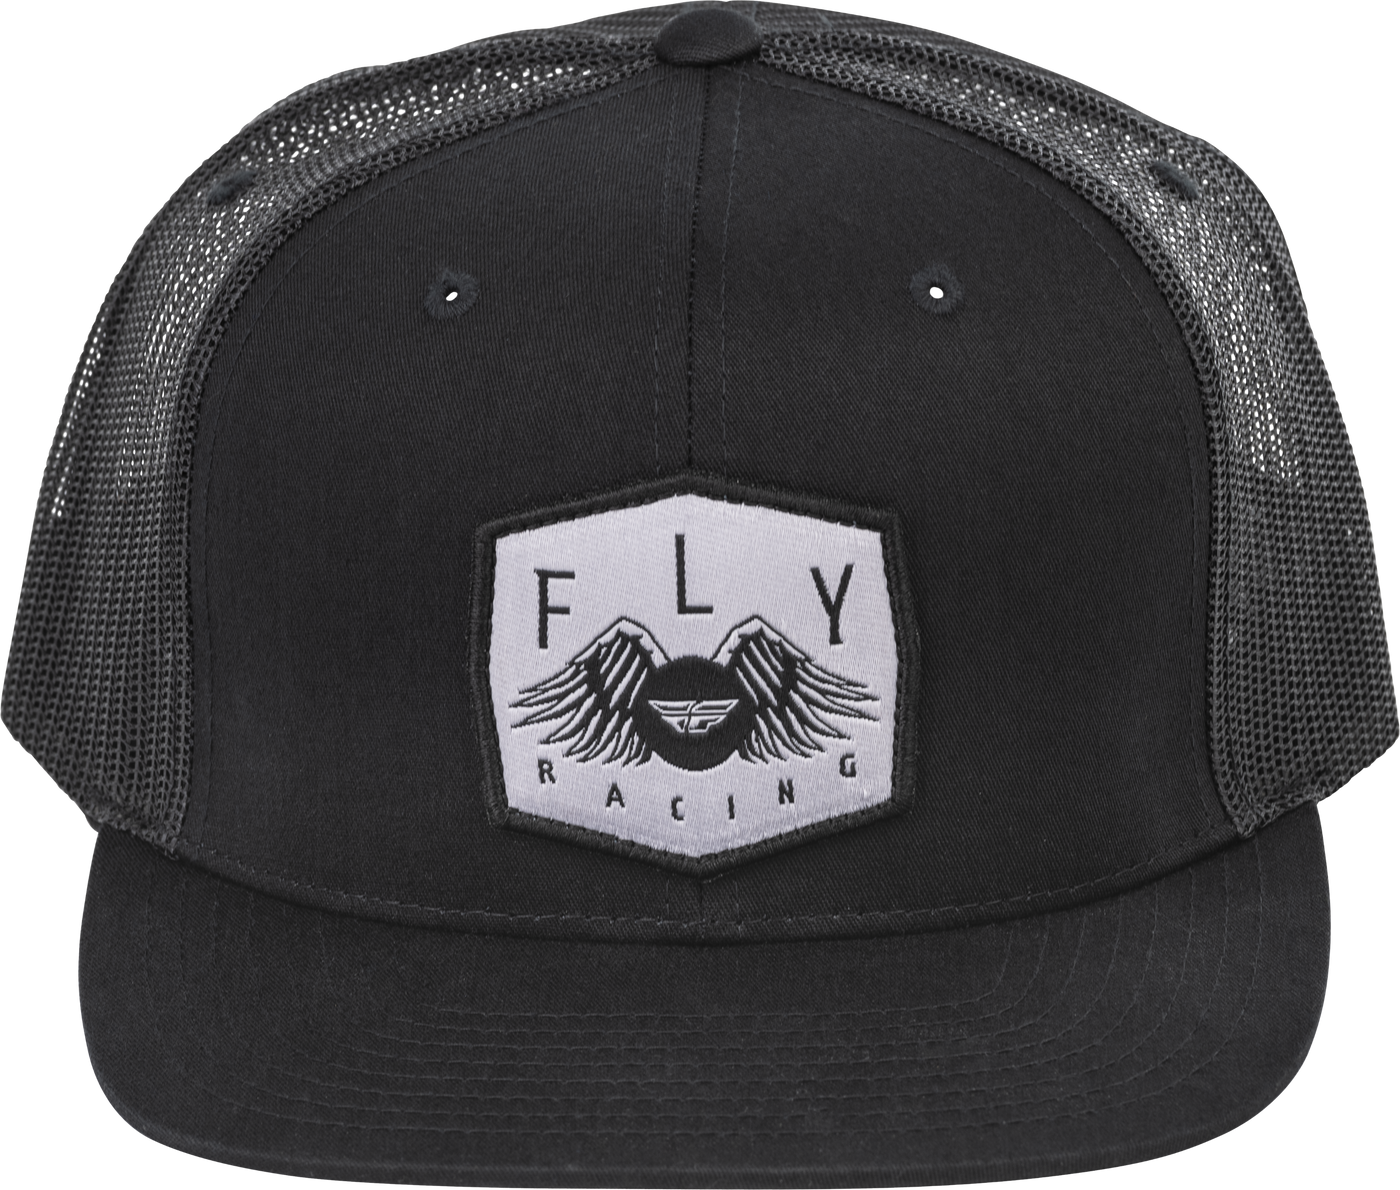 Youth Fly Freedom Trucker Hat Army Green